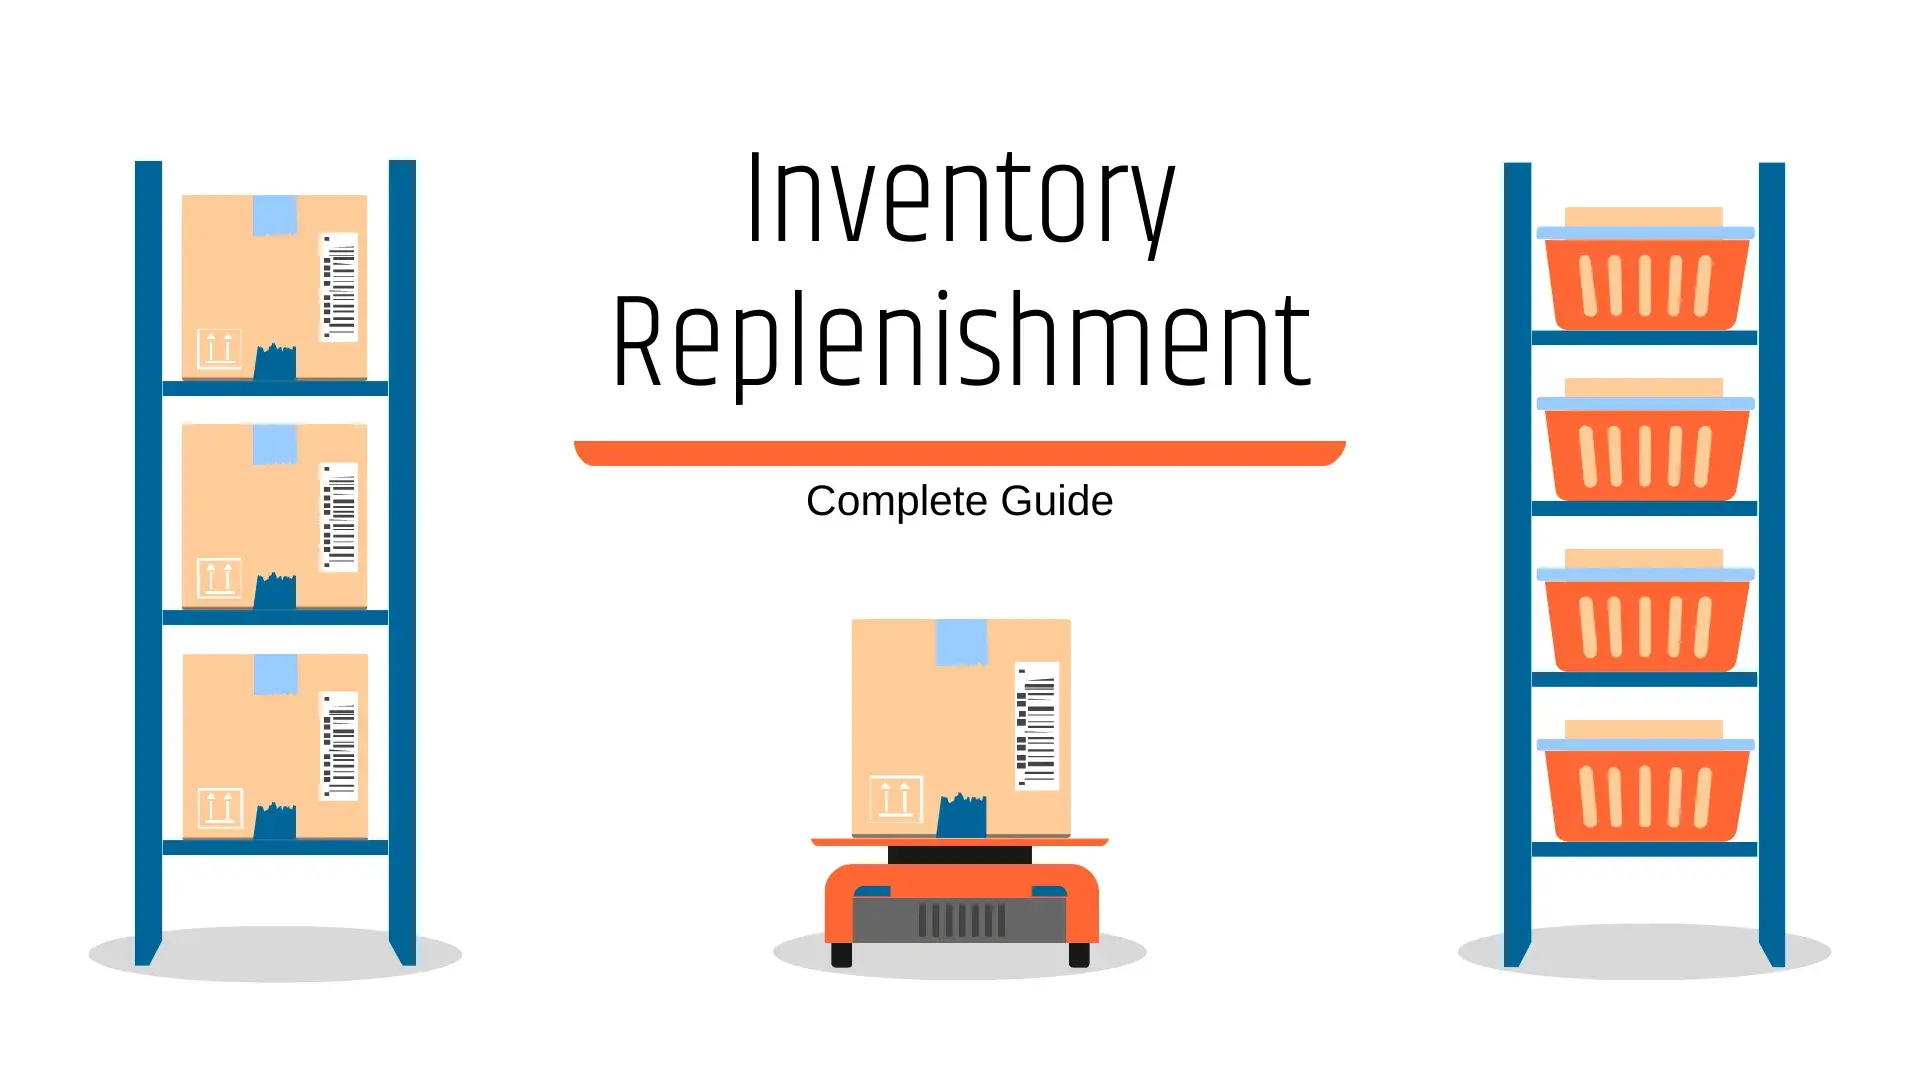 Inventory Replenishment: The Complete Guide for Restocking